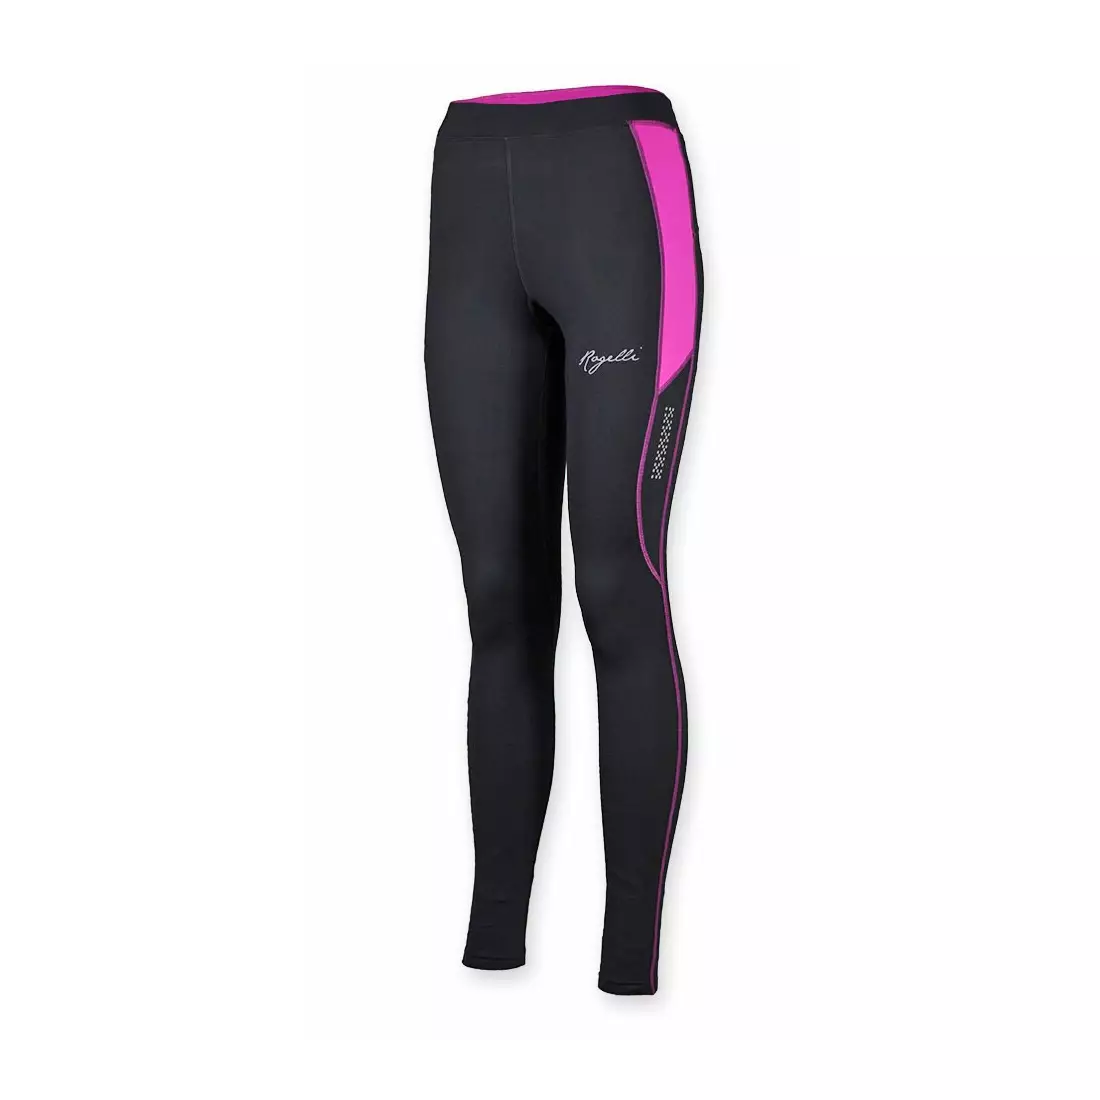 ROGELLI ADELA insulated women's running pants 840.750, black and pink